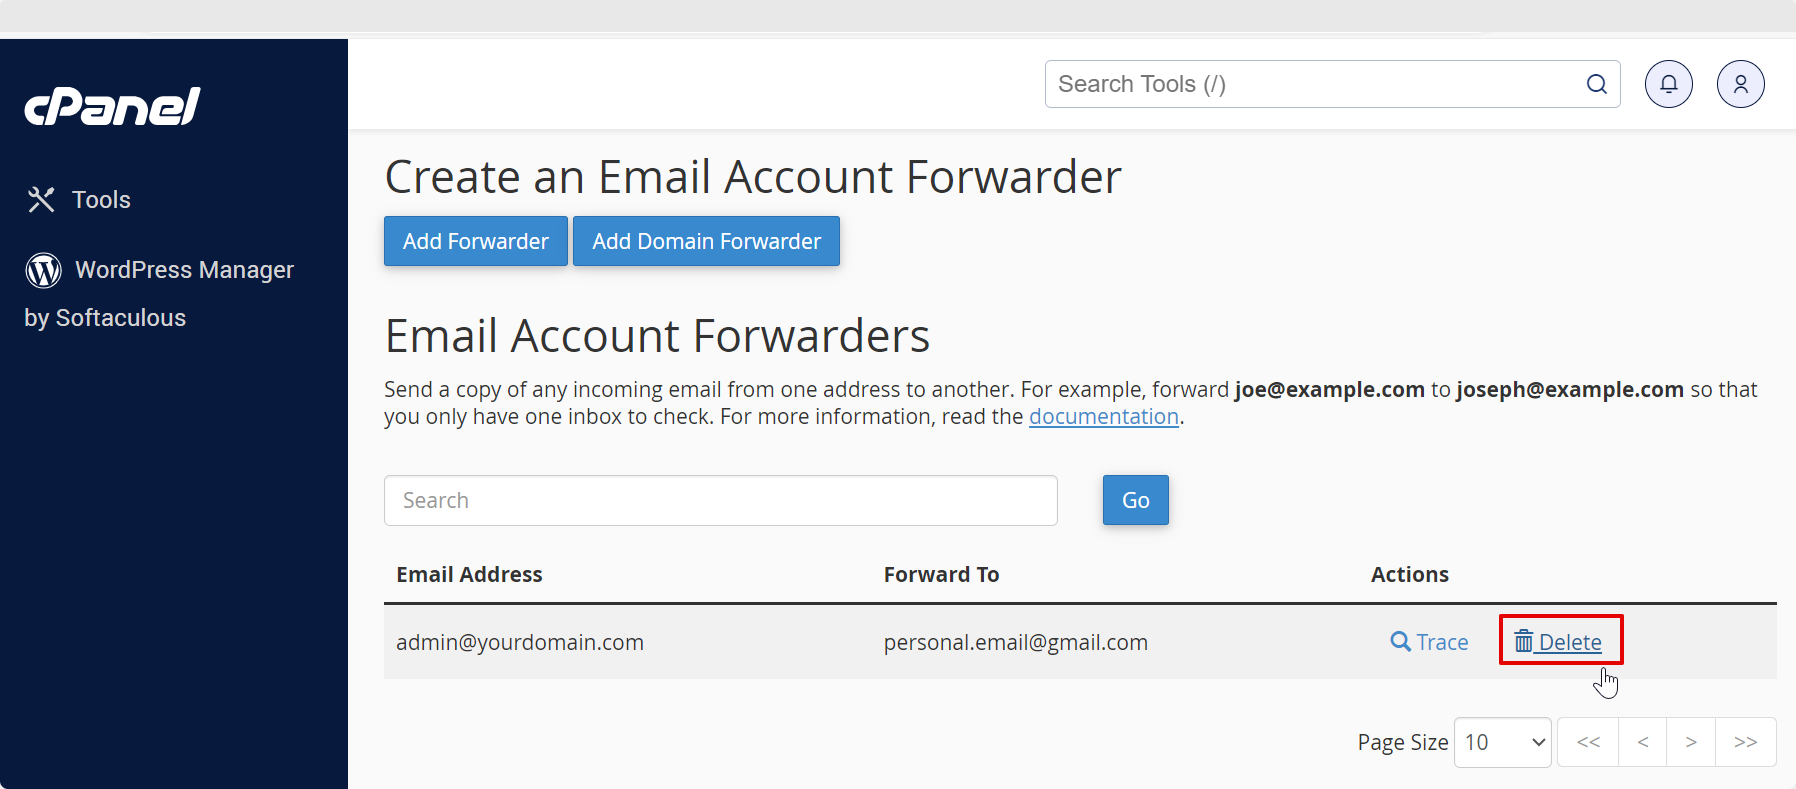 Delete Option for Each Email Account Forwarder